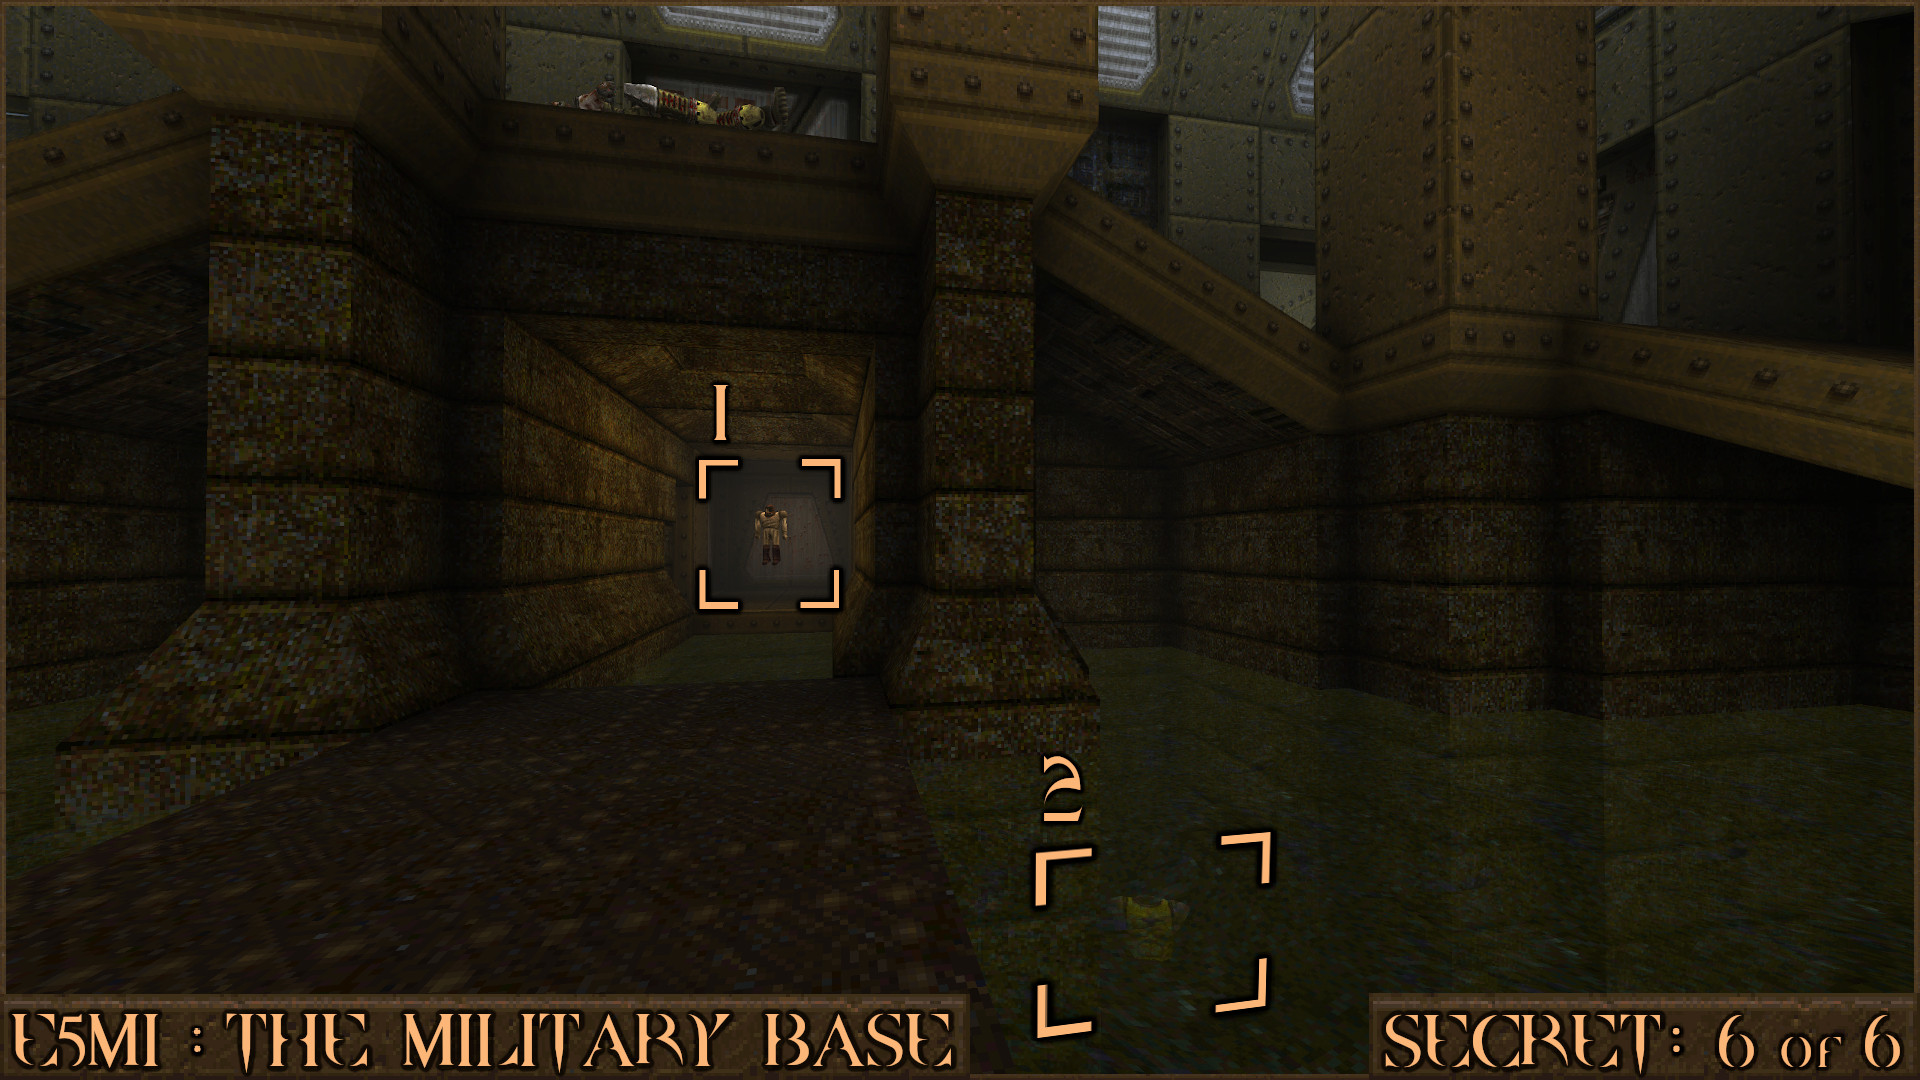 Quake Finding All Secrets in Quake Expansion pack: Dimension of the Past - E5M1: The Military Base - 9CE0C3A